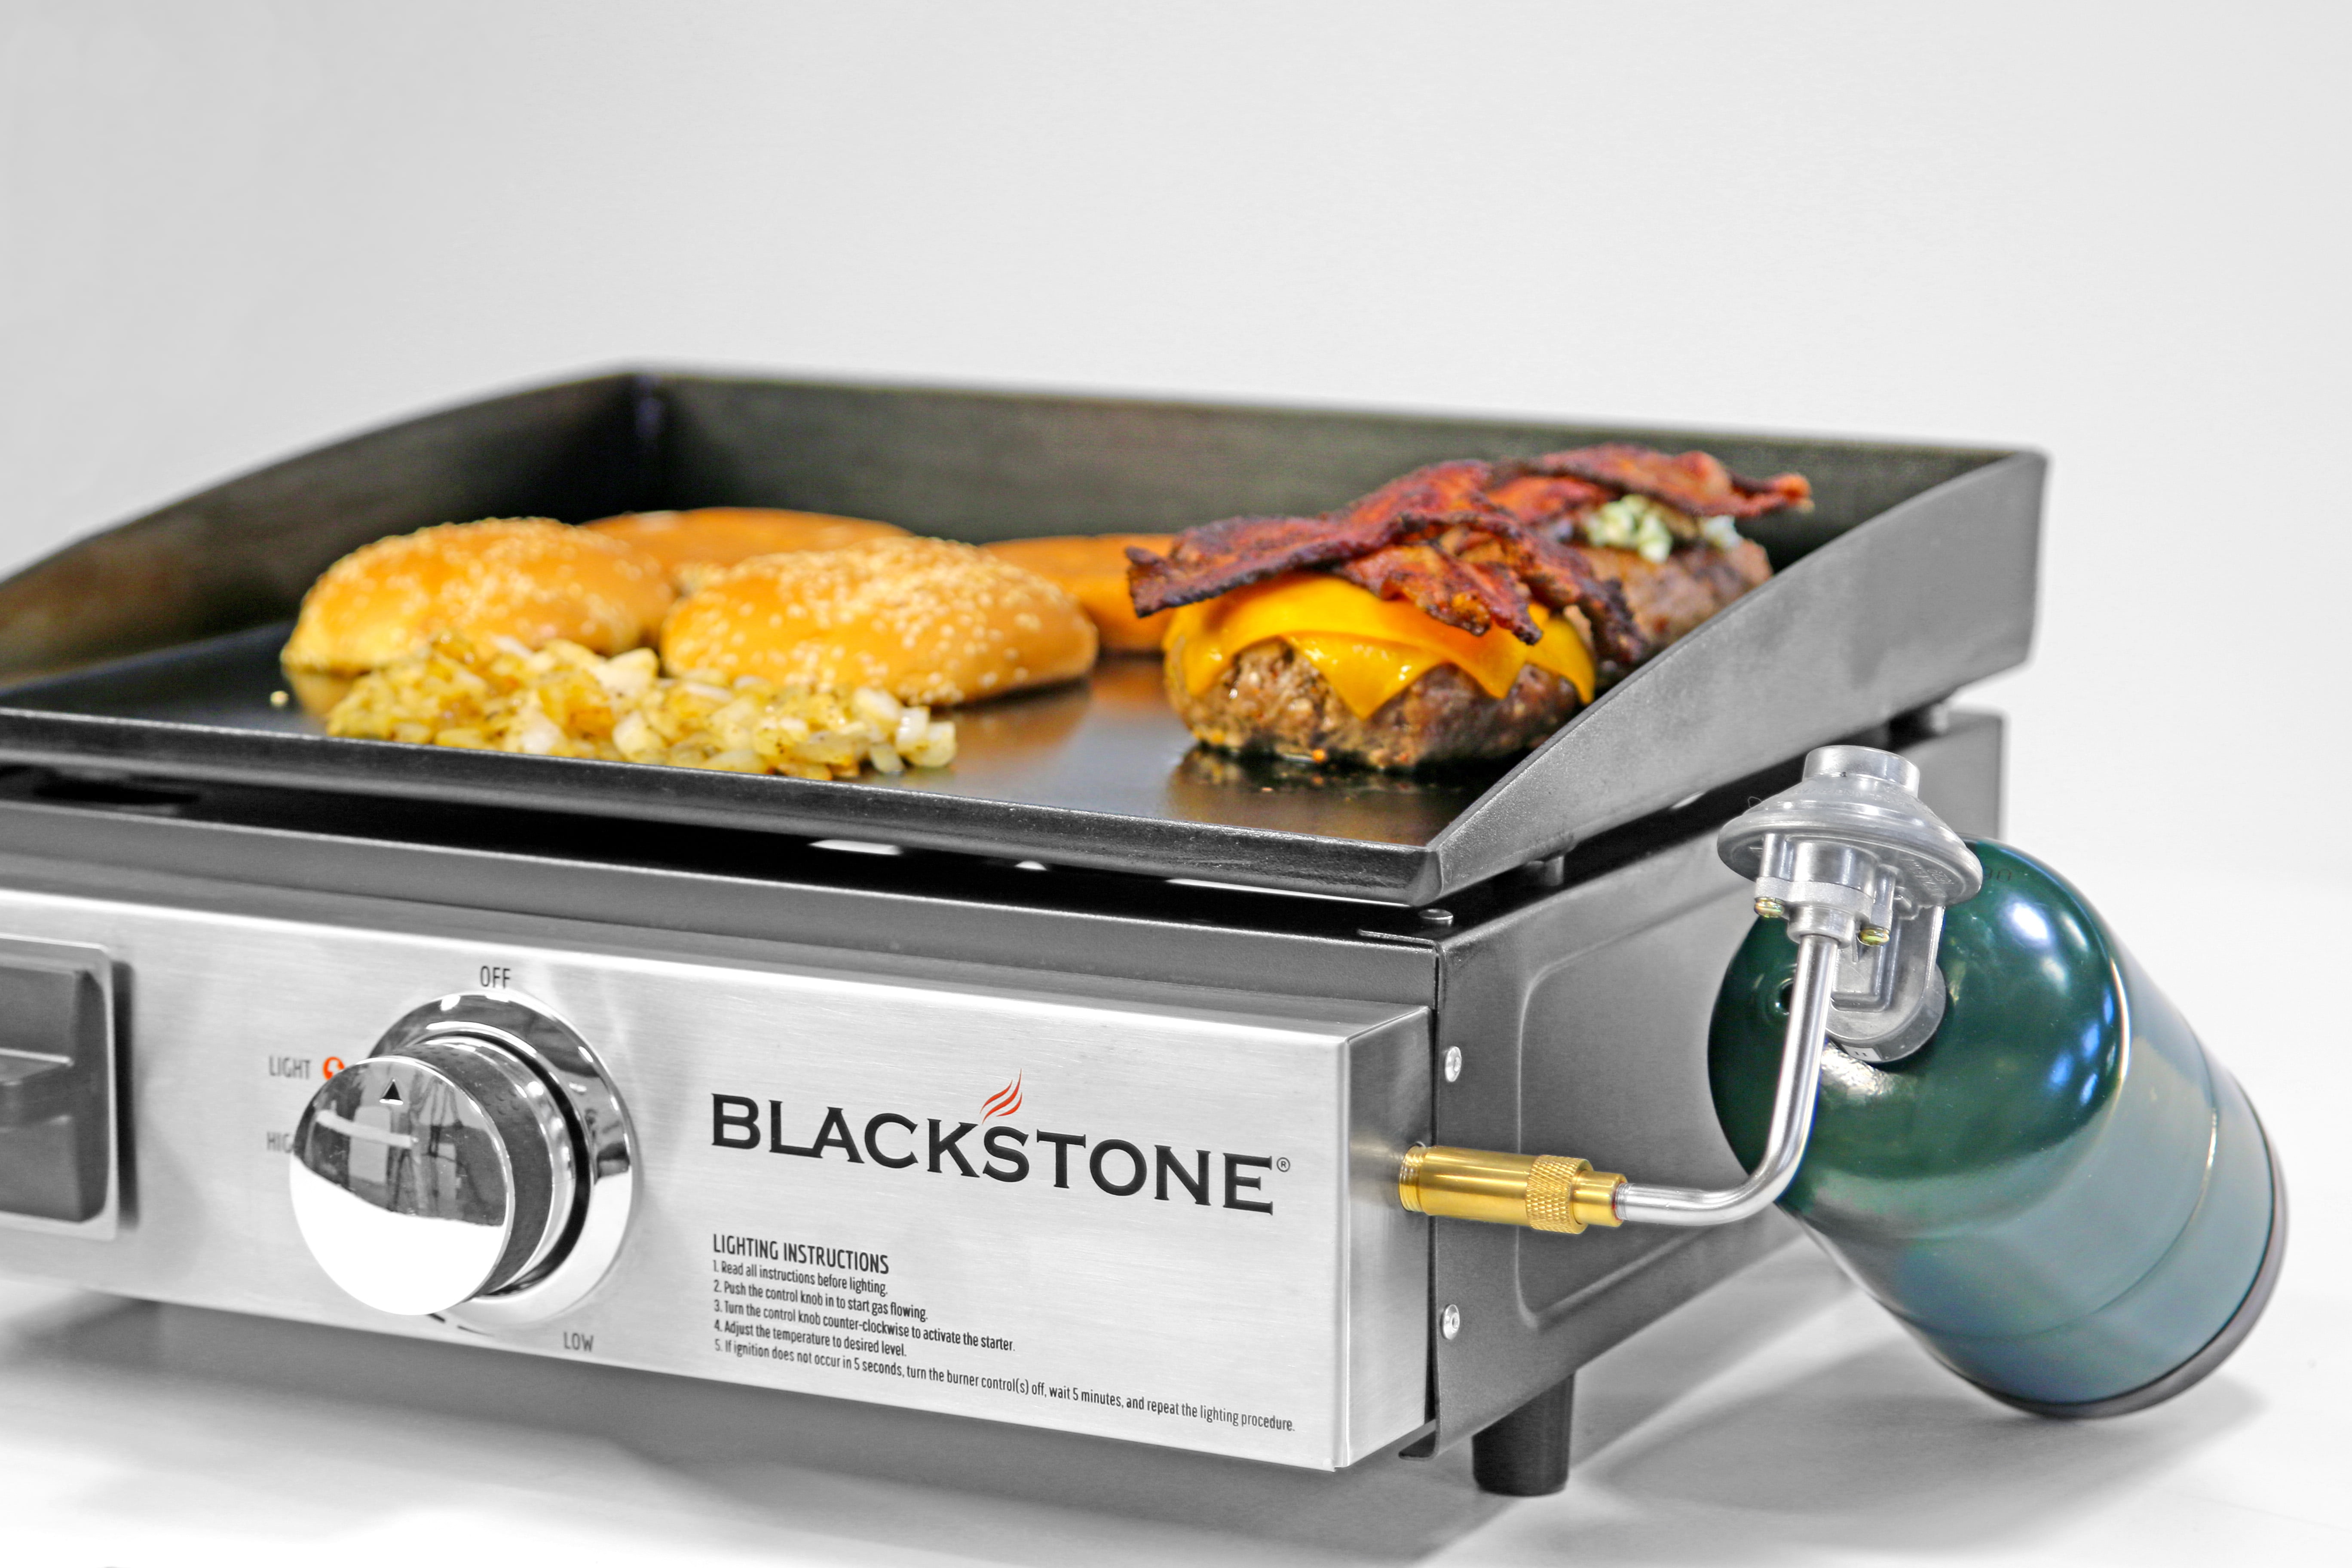  Blackstone 1650 Tabletop Grill Without Hood Propane Fuelled  Portable Stovetop Gas Rear Grease Trap for Kitchen, Outdoor, Camping,  Tailgating or Picnicking, 17 Inch Griddle, Black : Patio, Lawn & Garden